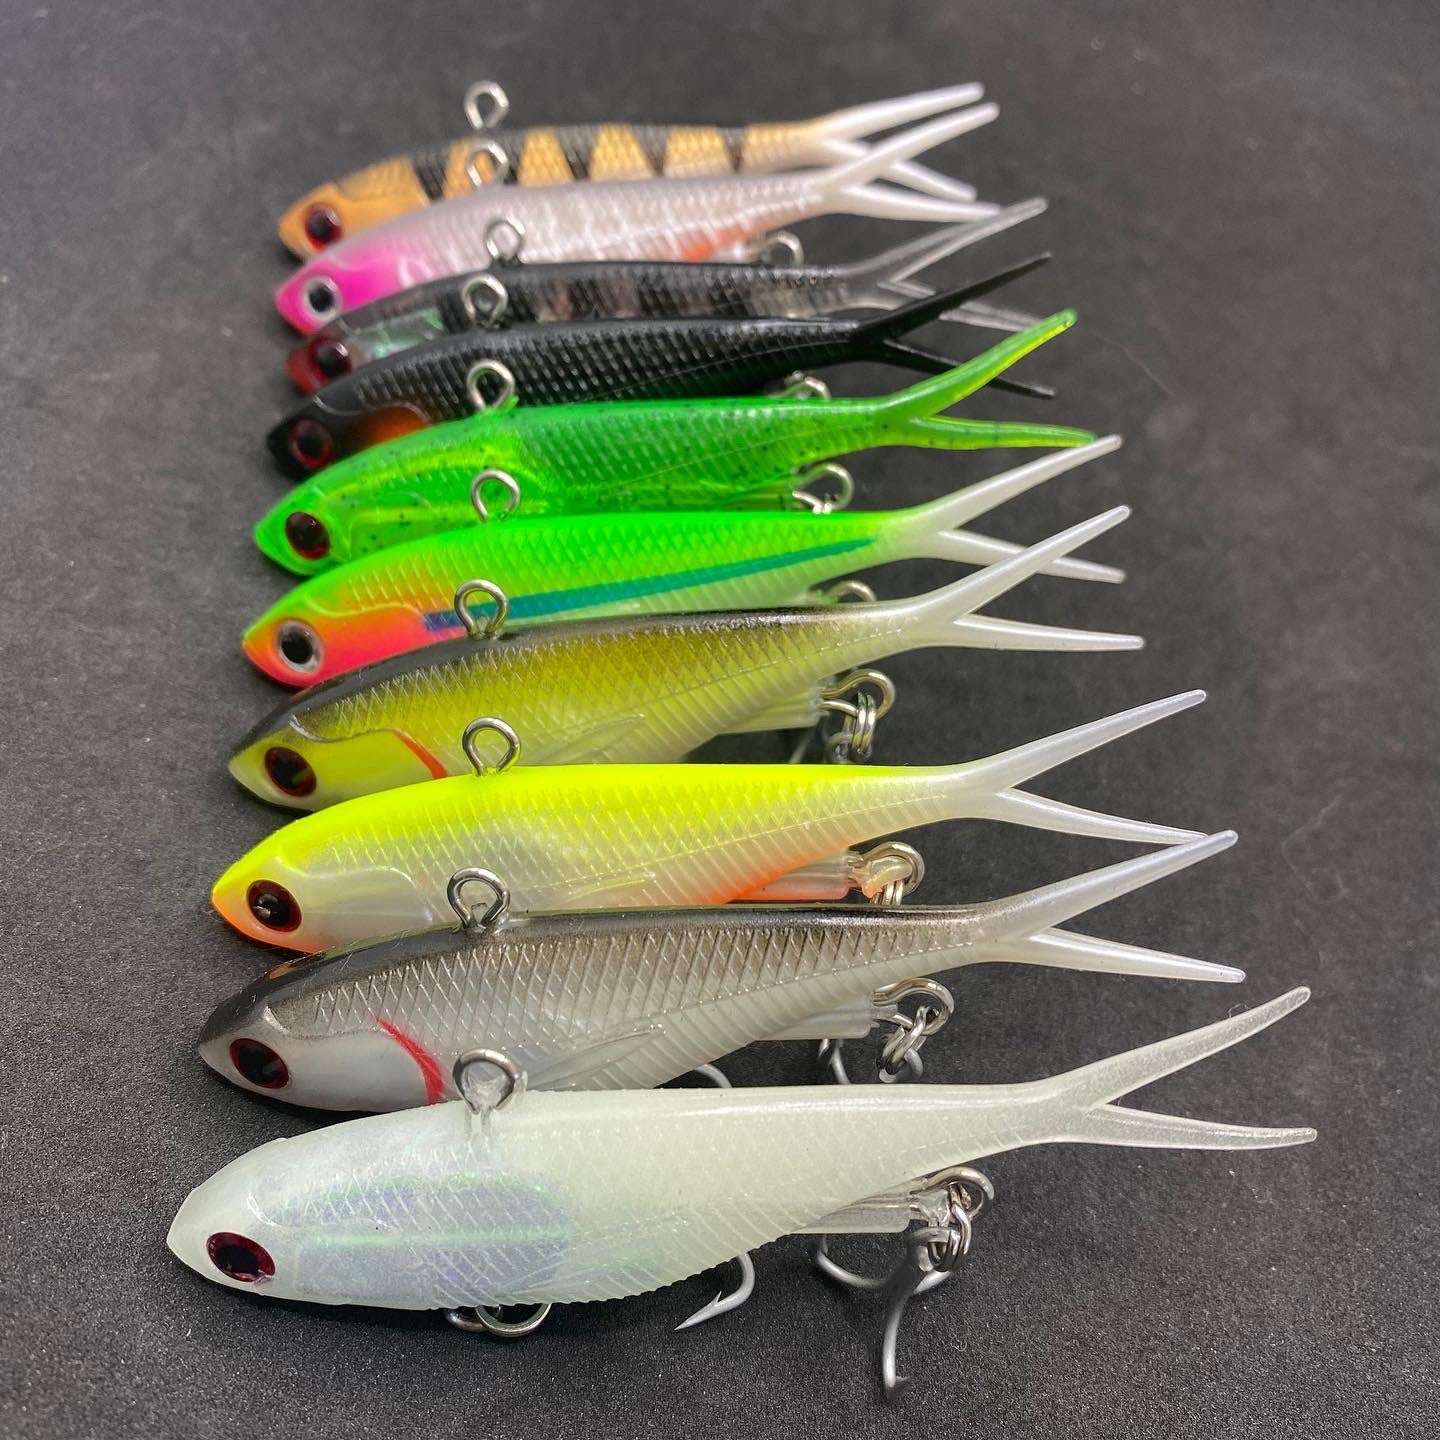 Reel Action Lures (@reelactionlures) • Instagram photos and videos